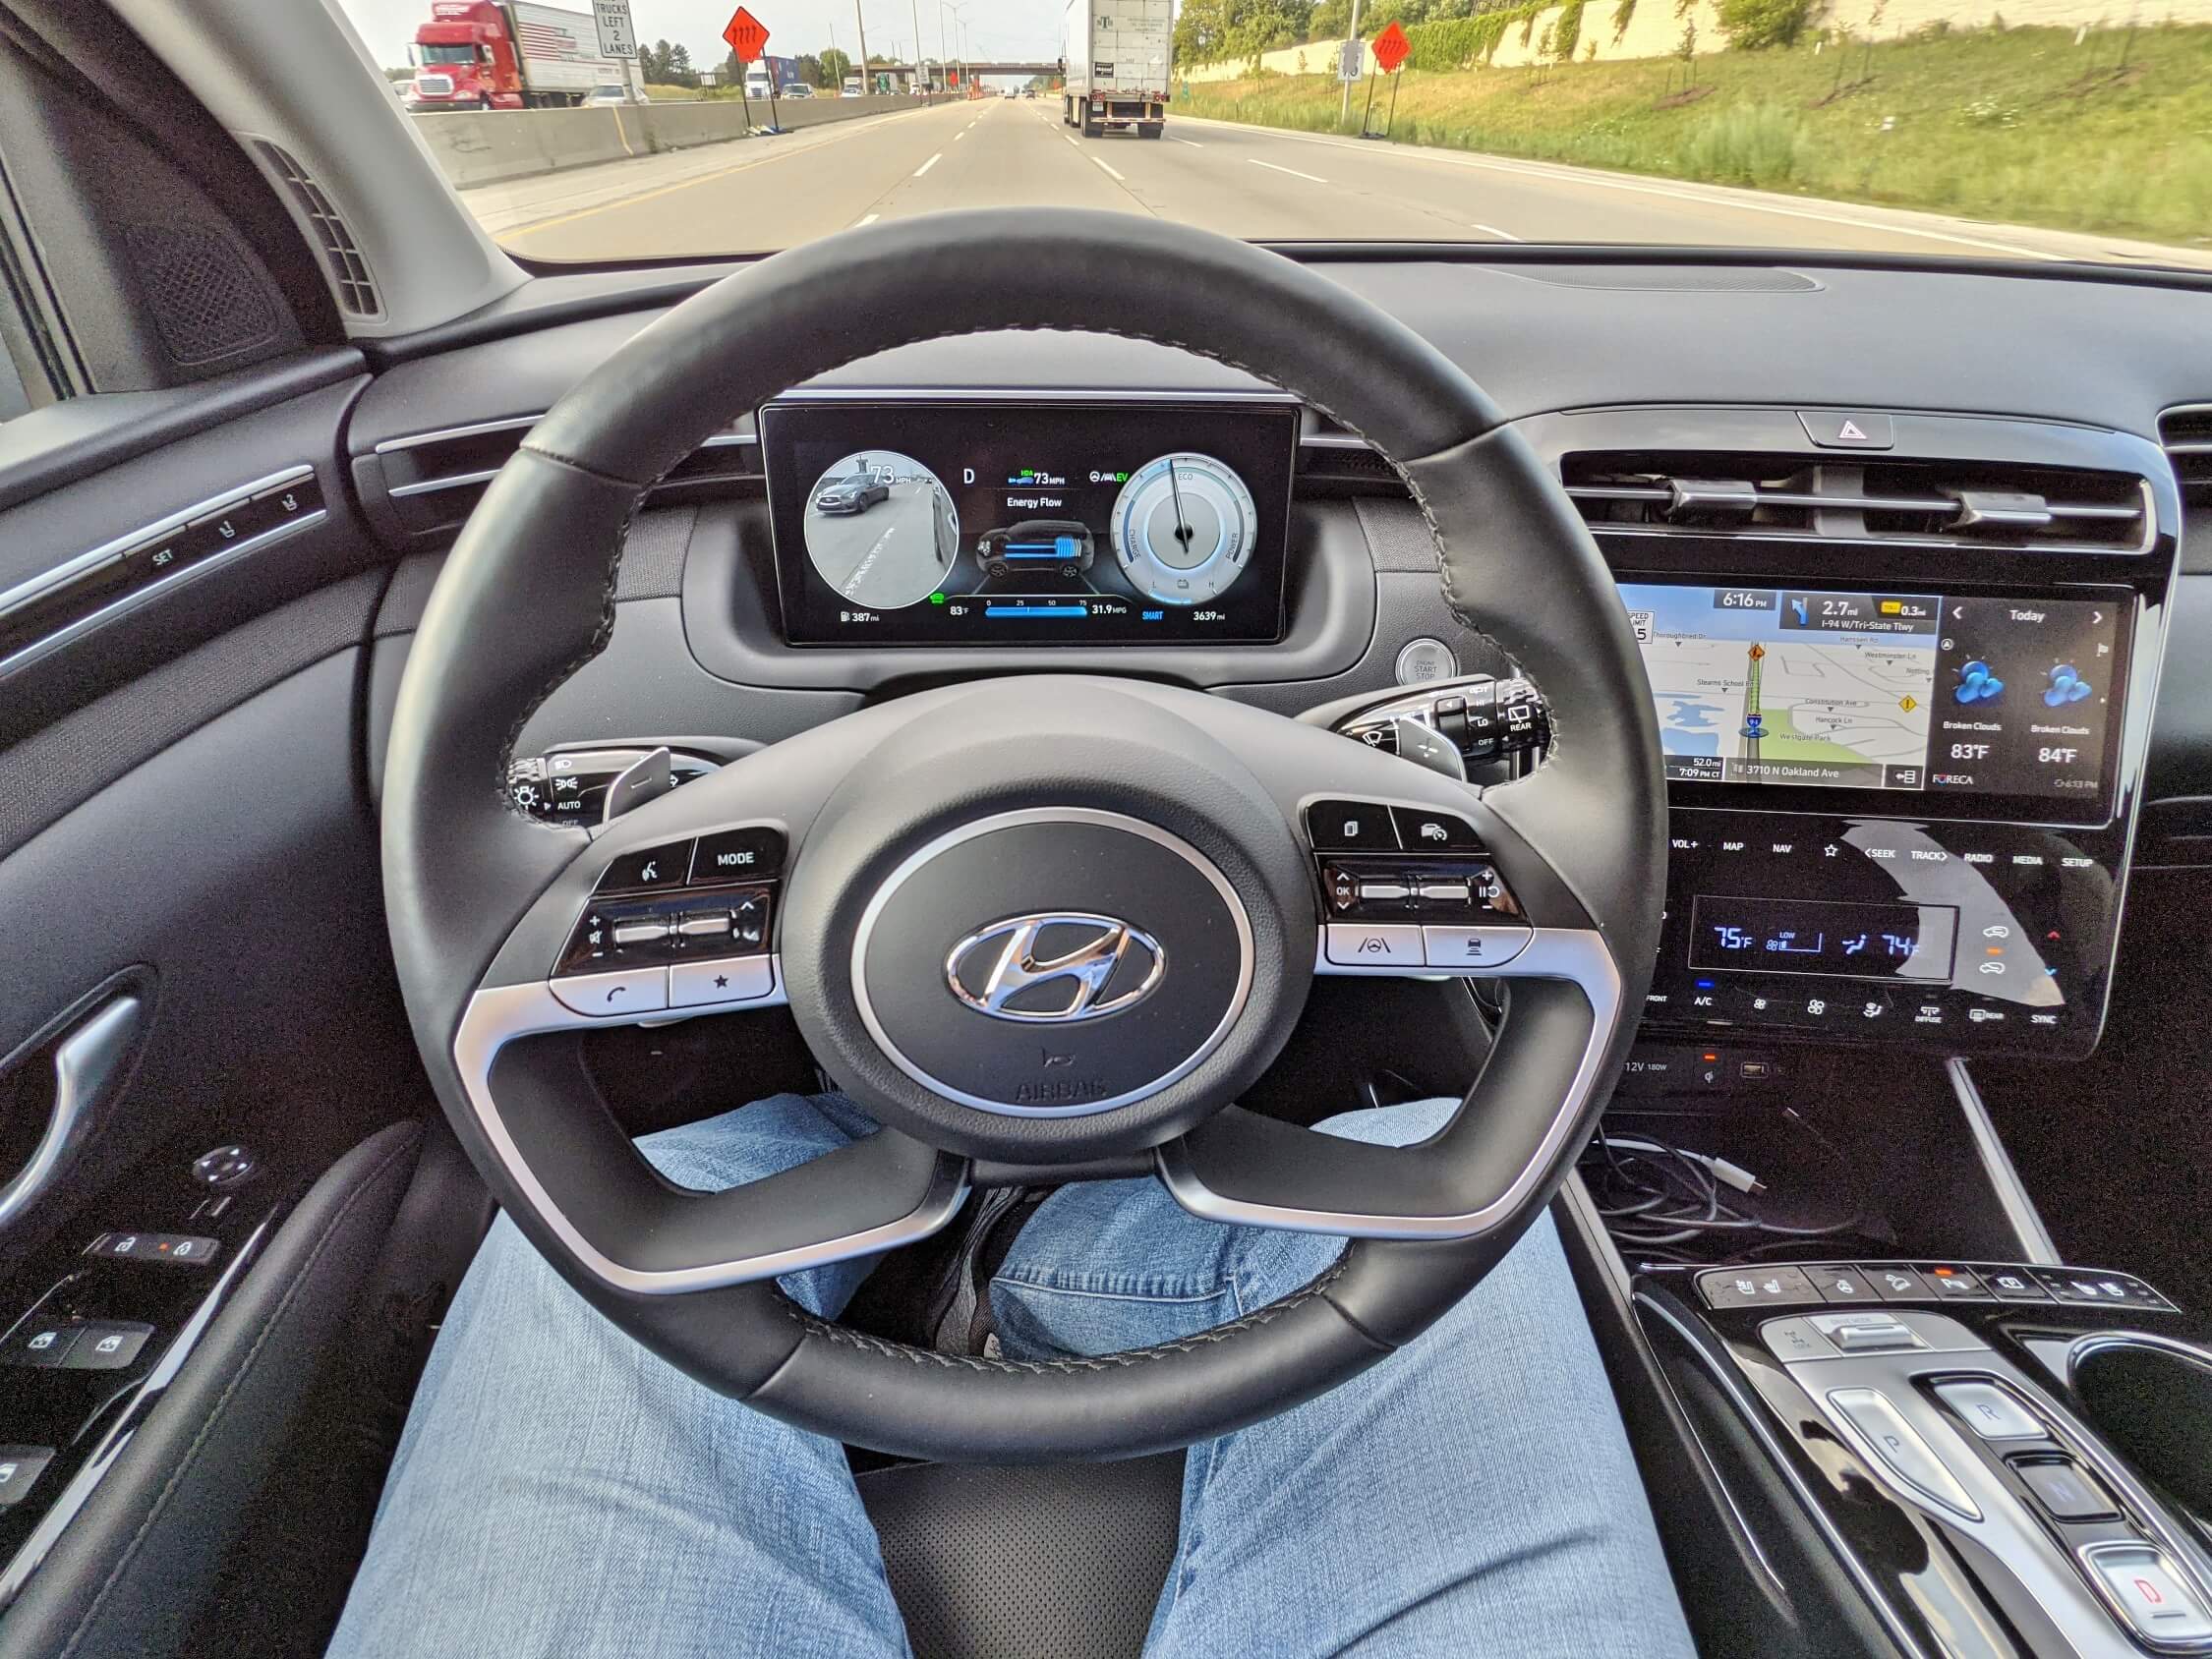 2022 Hyundai Tucson Limited Hybrid AWD: Blind View Monitor opens video of adjacent traffic in either corresponding circular gauge, as activated by directional lever